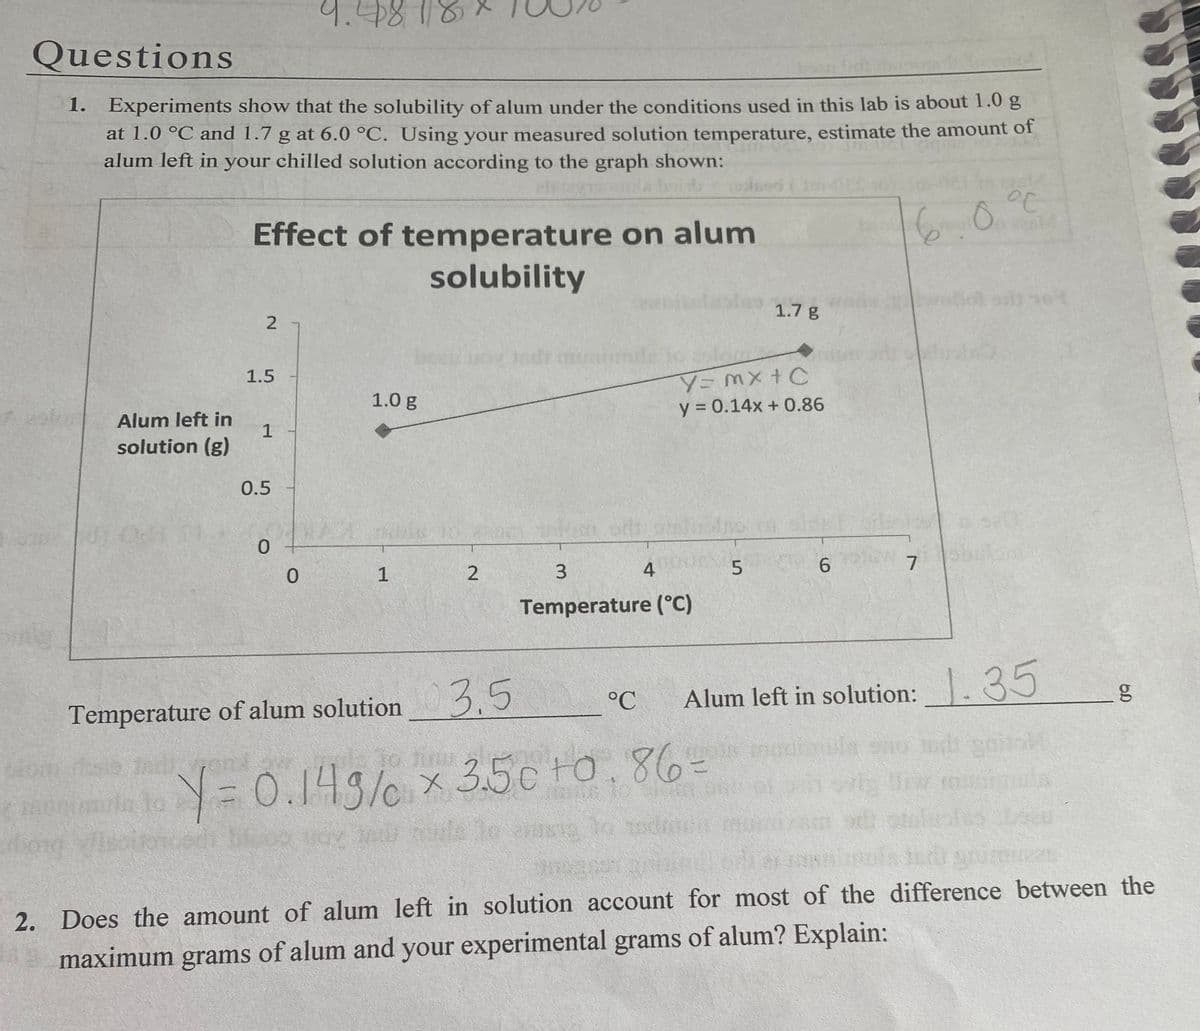 9.48 182
Questions
1. Experiments show that the solubility of alum under the conditions used in this lab is about 1.0 g
at 1.0 °C and 1.7 g at 6.0 °C. Using your measured solution temperature, estimate the amount of
alum left in your chilled solution according to the graph shown:
Effect of temperature on alum
solubility
1.7 g
Y=MX+C
y = 0.14x + 0.86
1.5
1.0 g
Alum left in
1
solution (g)
0.5
0.
1
4
Temperature (°C)
3.5
Alum left in solution: . 35
1.35
°C
Temperature of alum solution
Hoste
Y=0.143/ x3.5c to,86=
2. Does the amount of alum left in solution account for most of the difference between the
maximum grams of alum and your experimental grams of alum? Explain:
2.
2.
